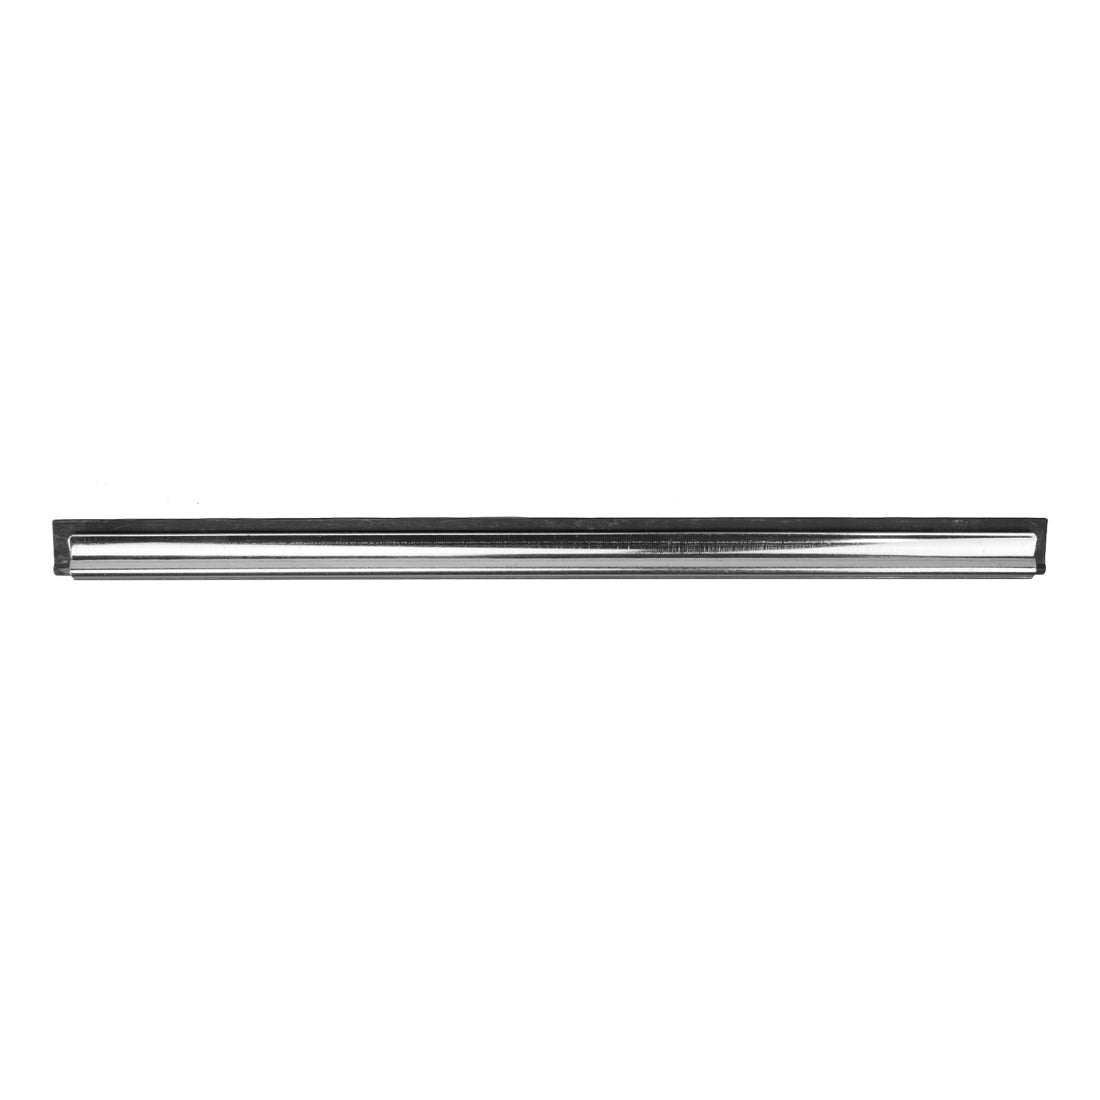 Pulex TechnoLite Stainless Steel Squeegee Channel Front View